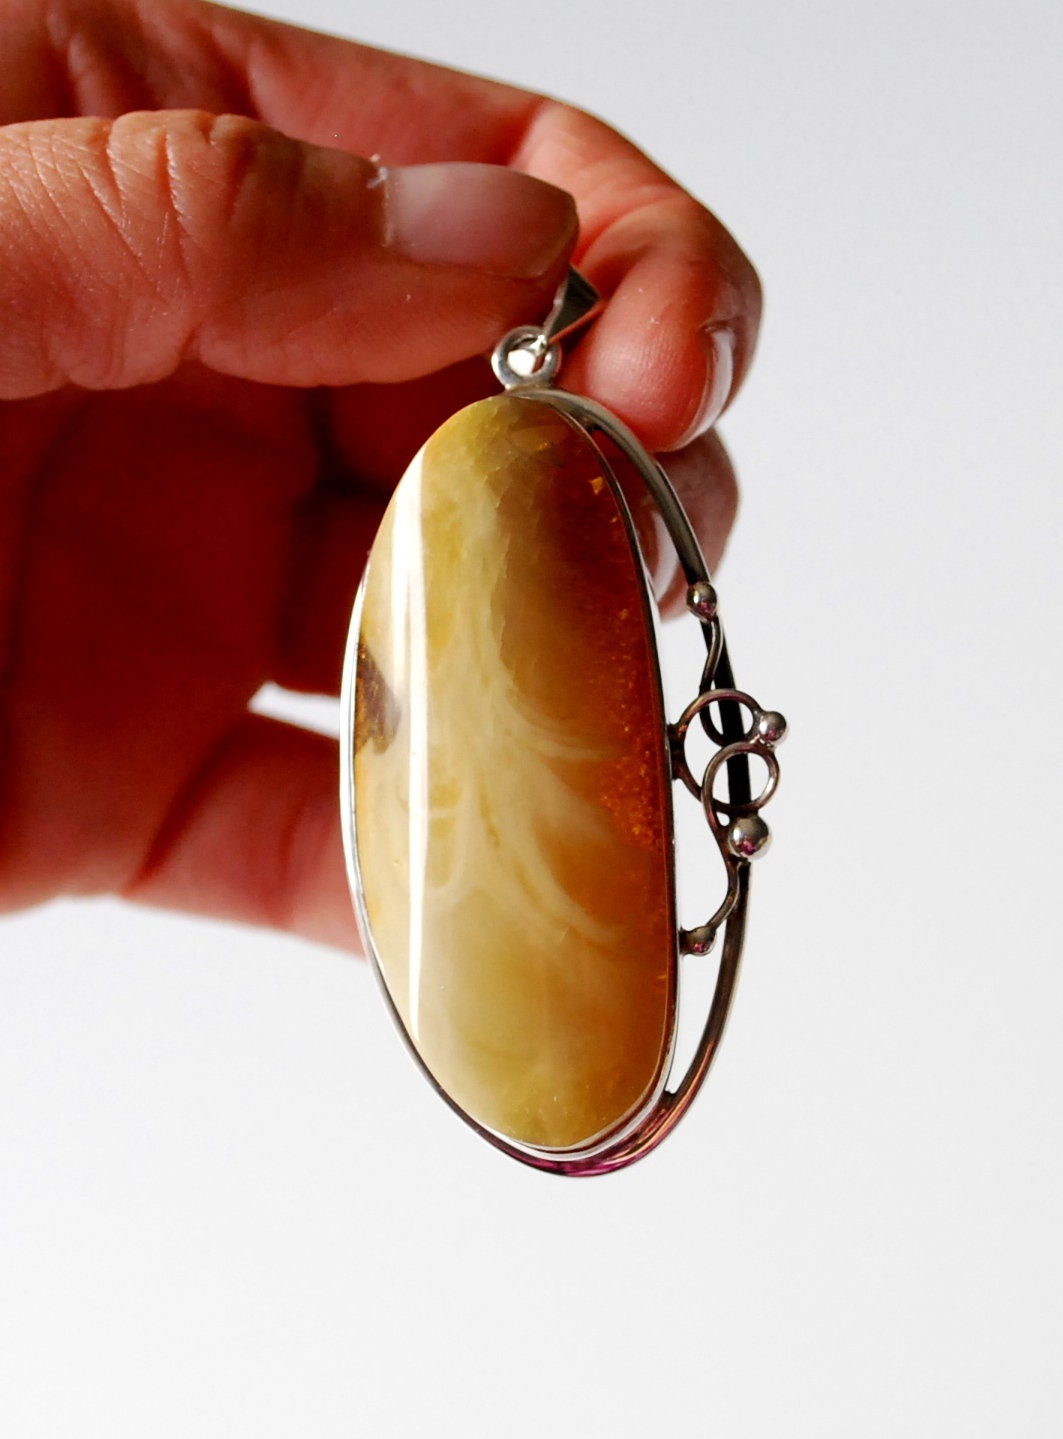 179 G Stunning Amber Color Natural Amber Pendant Amber and - Etsy